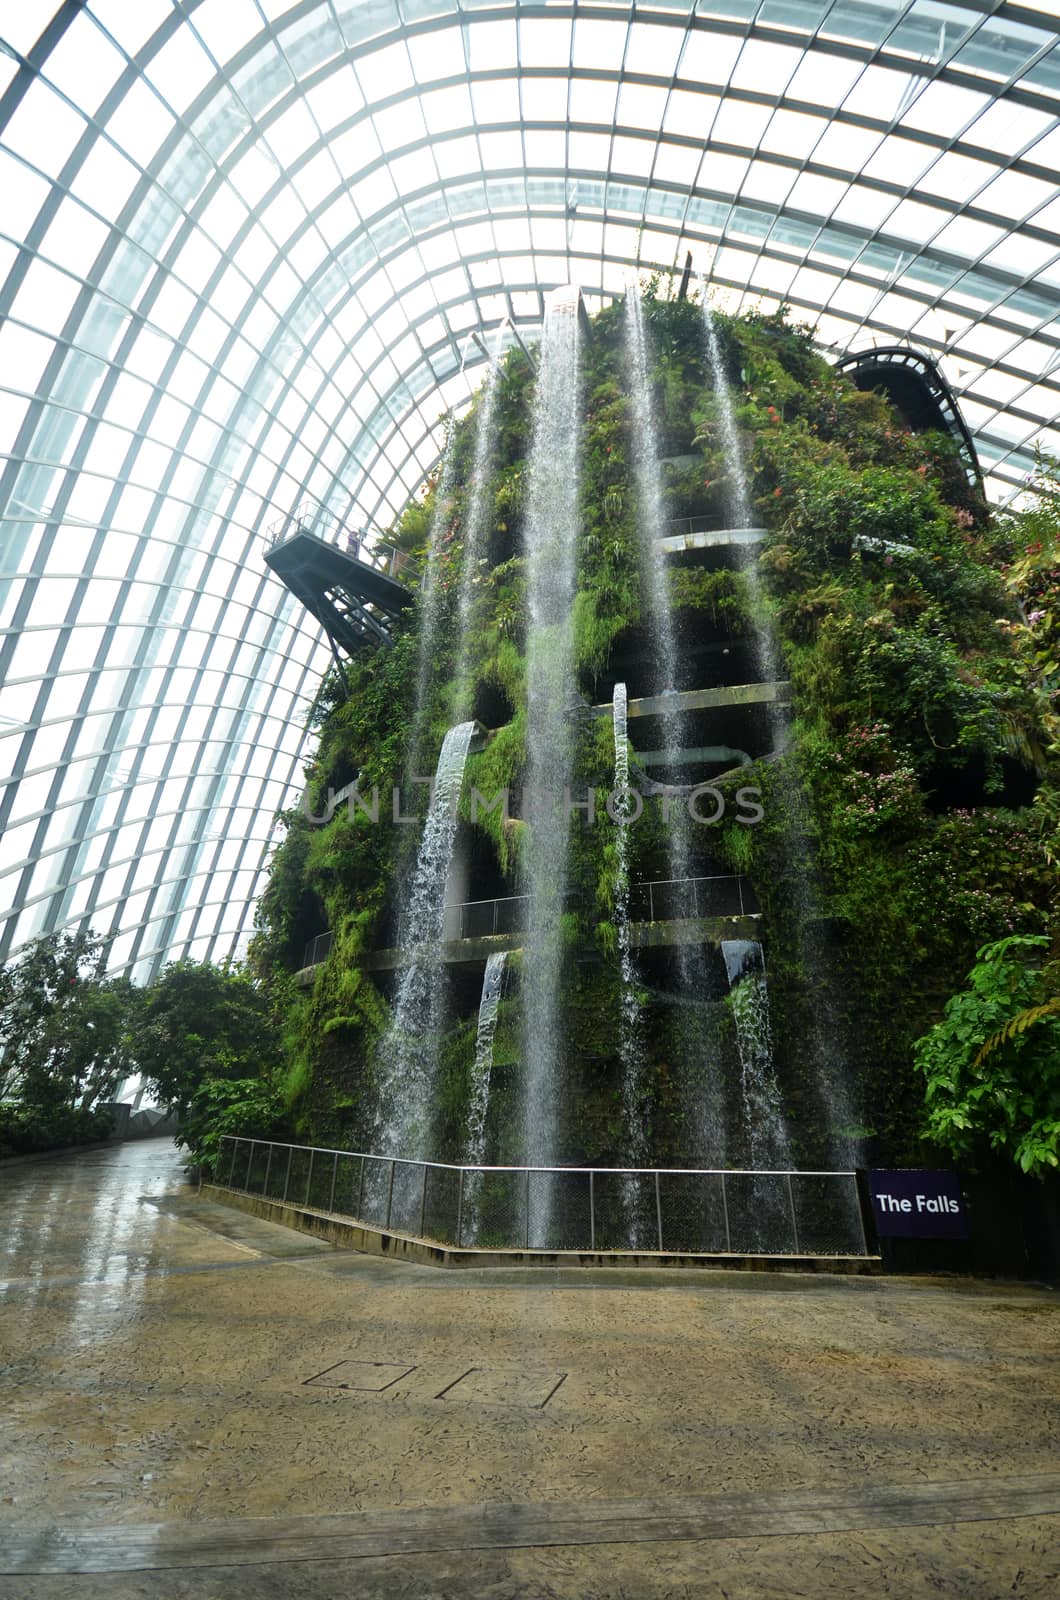 Cloud Forest at Gardens by the Bay in Singapore by tang90246